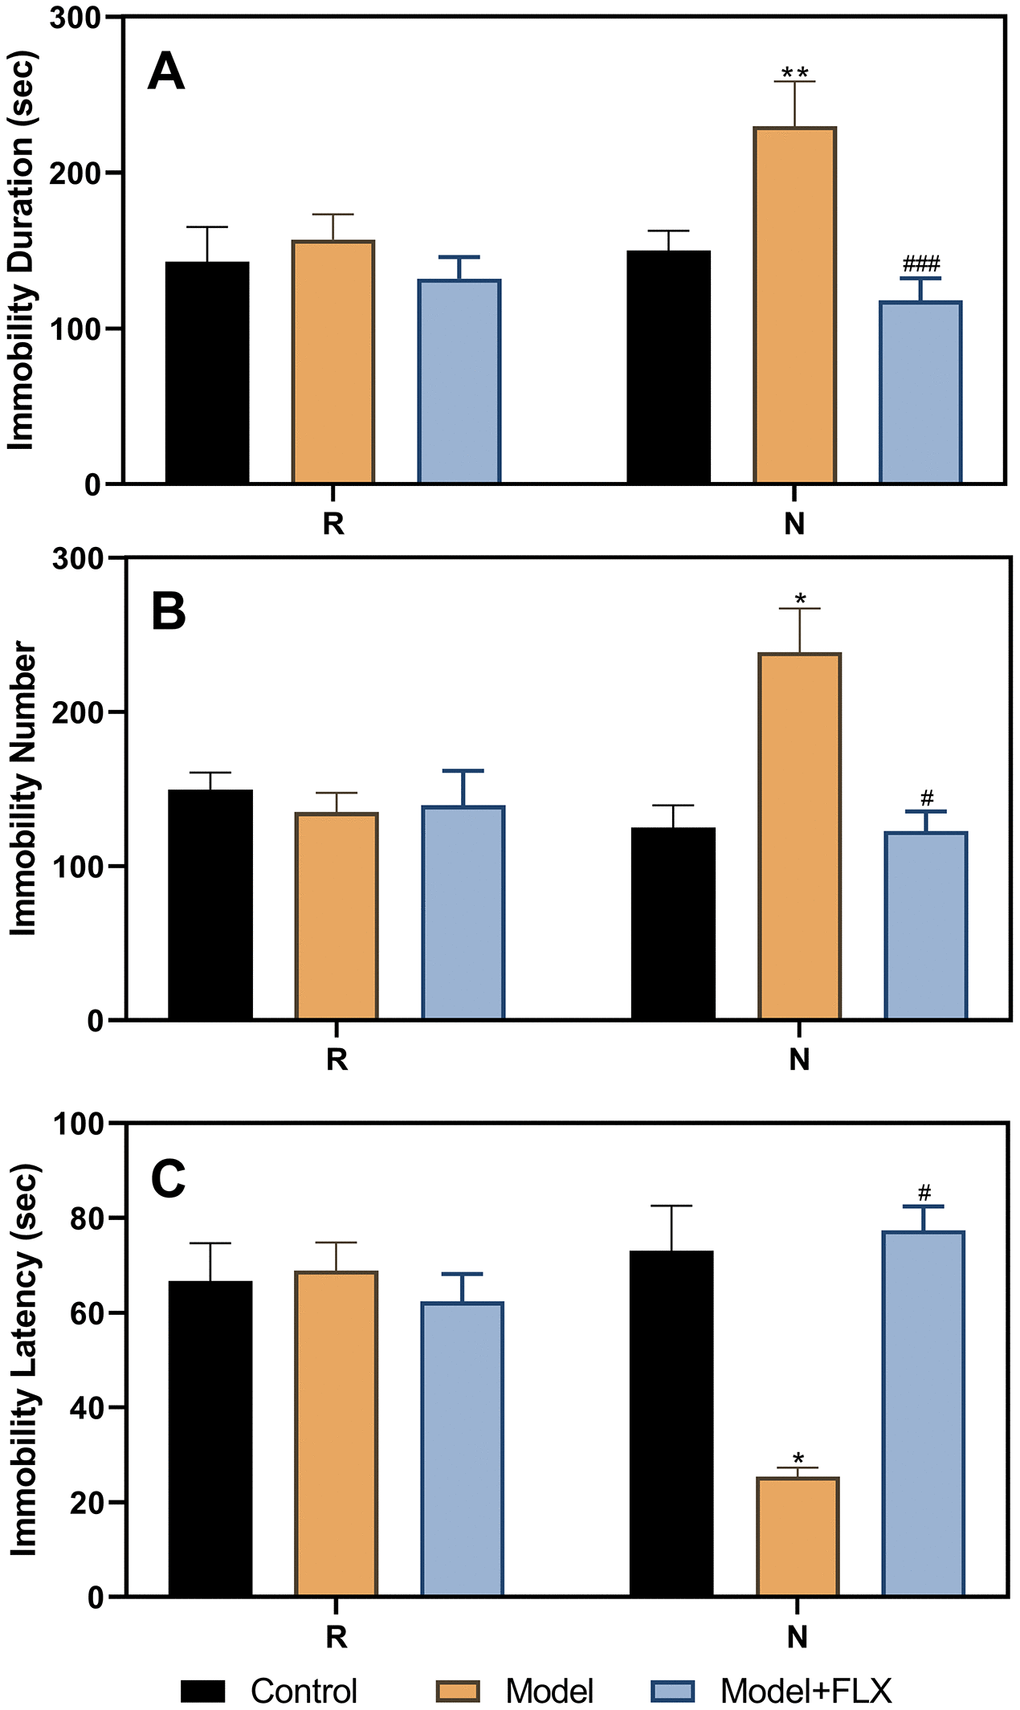 Results of the forced swimming test after fluoxetine treatment in rats with a normal estrous cycle. (A) Results of immobility duration. (B) Results of immobility number. (C) Results of immobility latency. N, the test in the non-receptive phase; R, the test in the receptive phase. *pppp